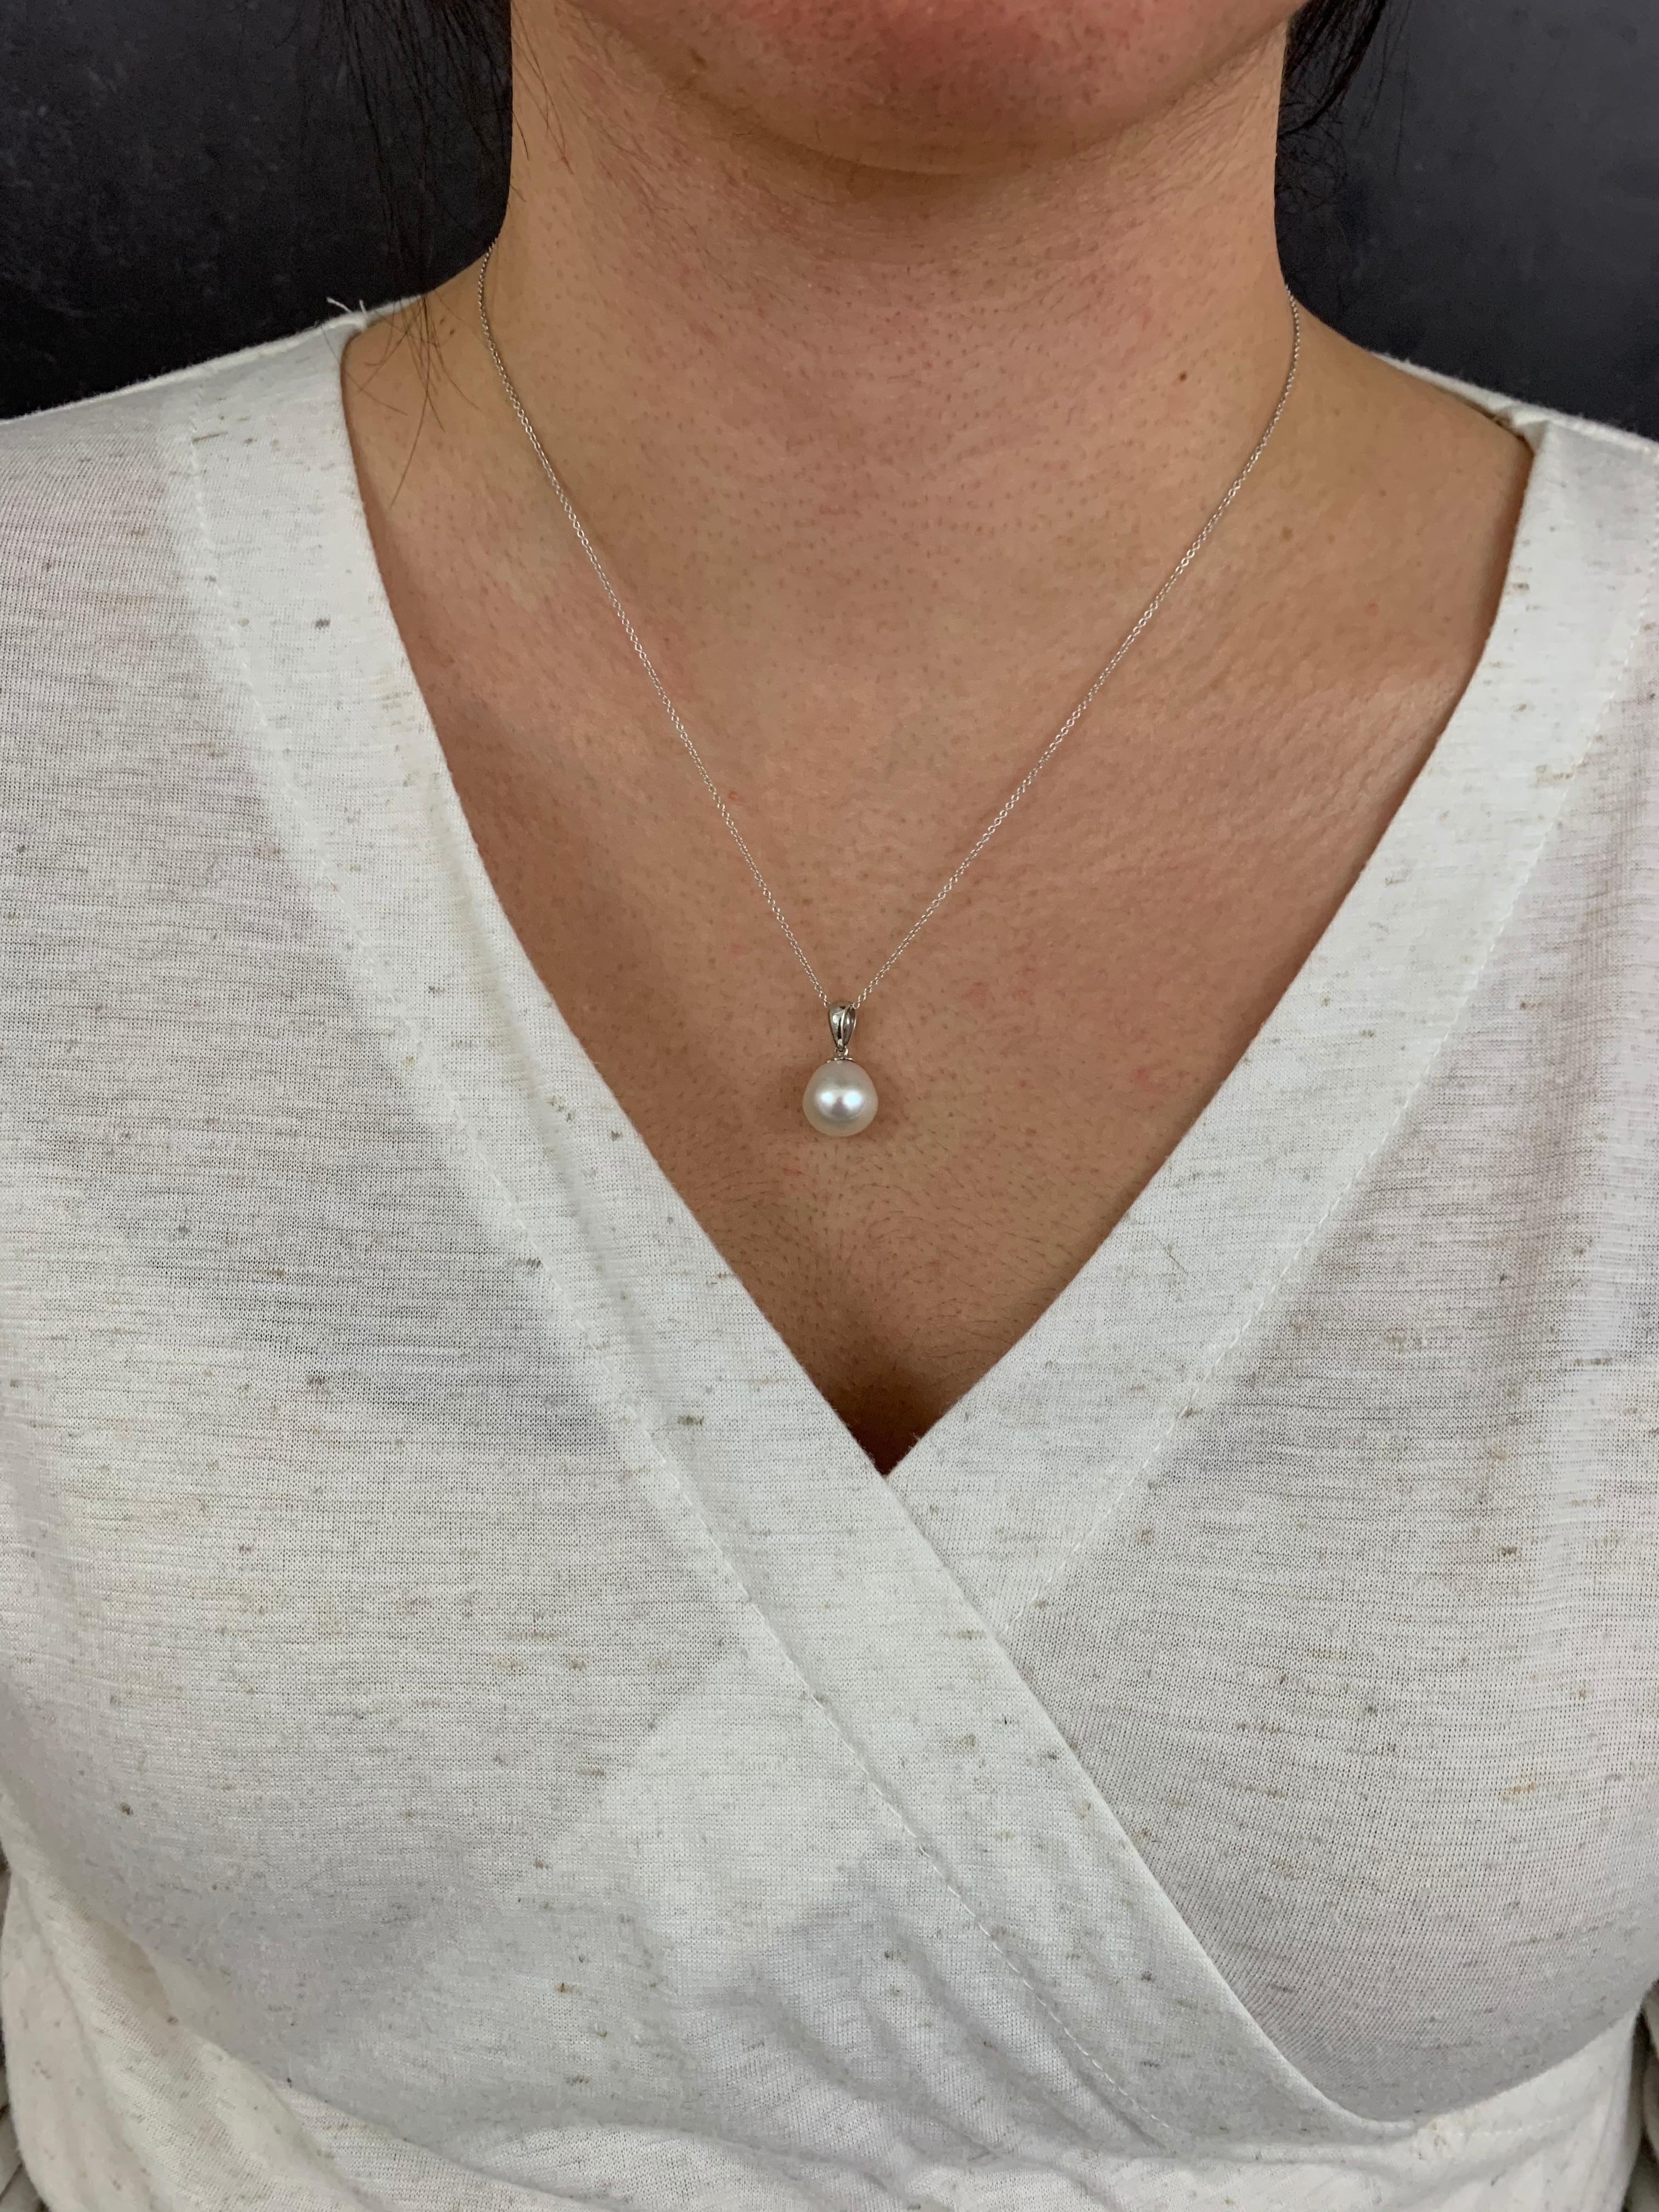 14K White Gold

1 Round Tahitian South Sea Pearl at 2.38 Carats

Fine one-of-a-kind craftsmanship meets incredible quality in this breathtaking piece of jewelry. 

All pieces are made in the U.S.A and come with a lifetime warranty! 

Undeniably